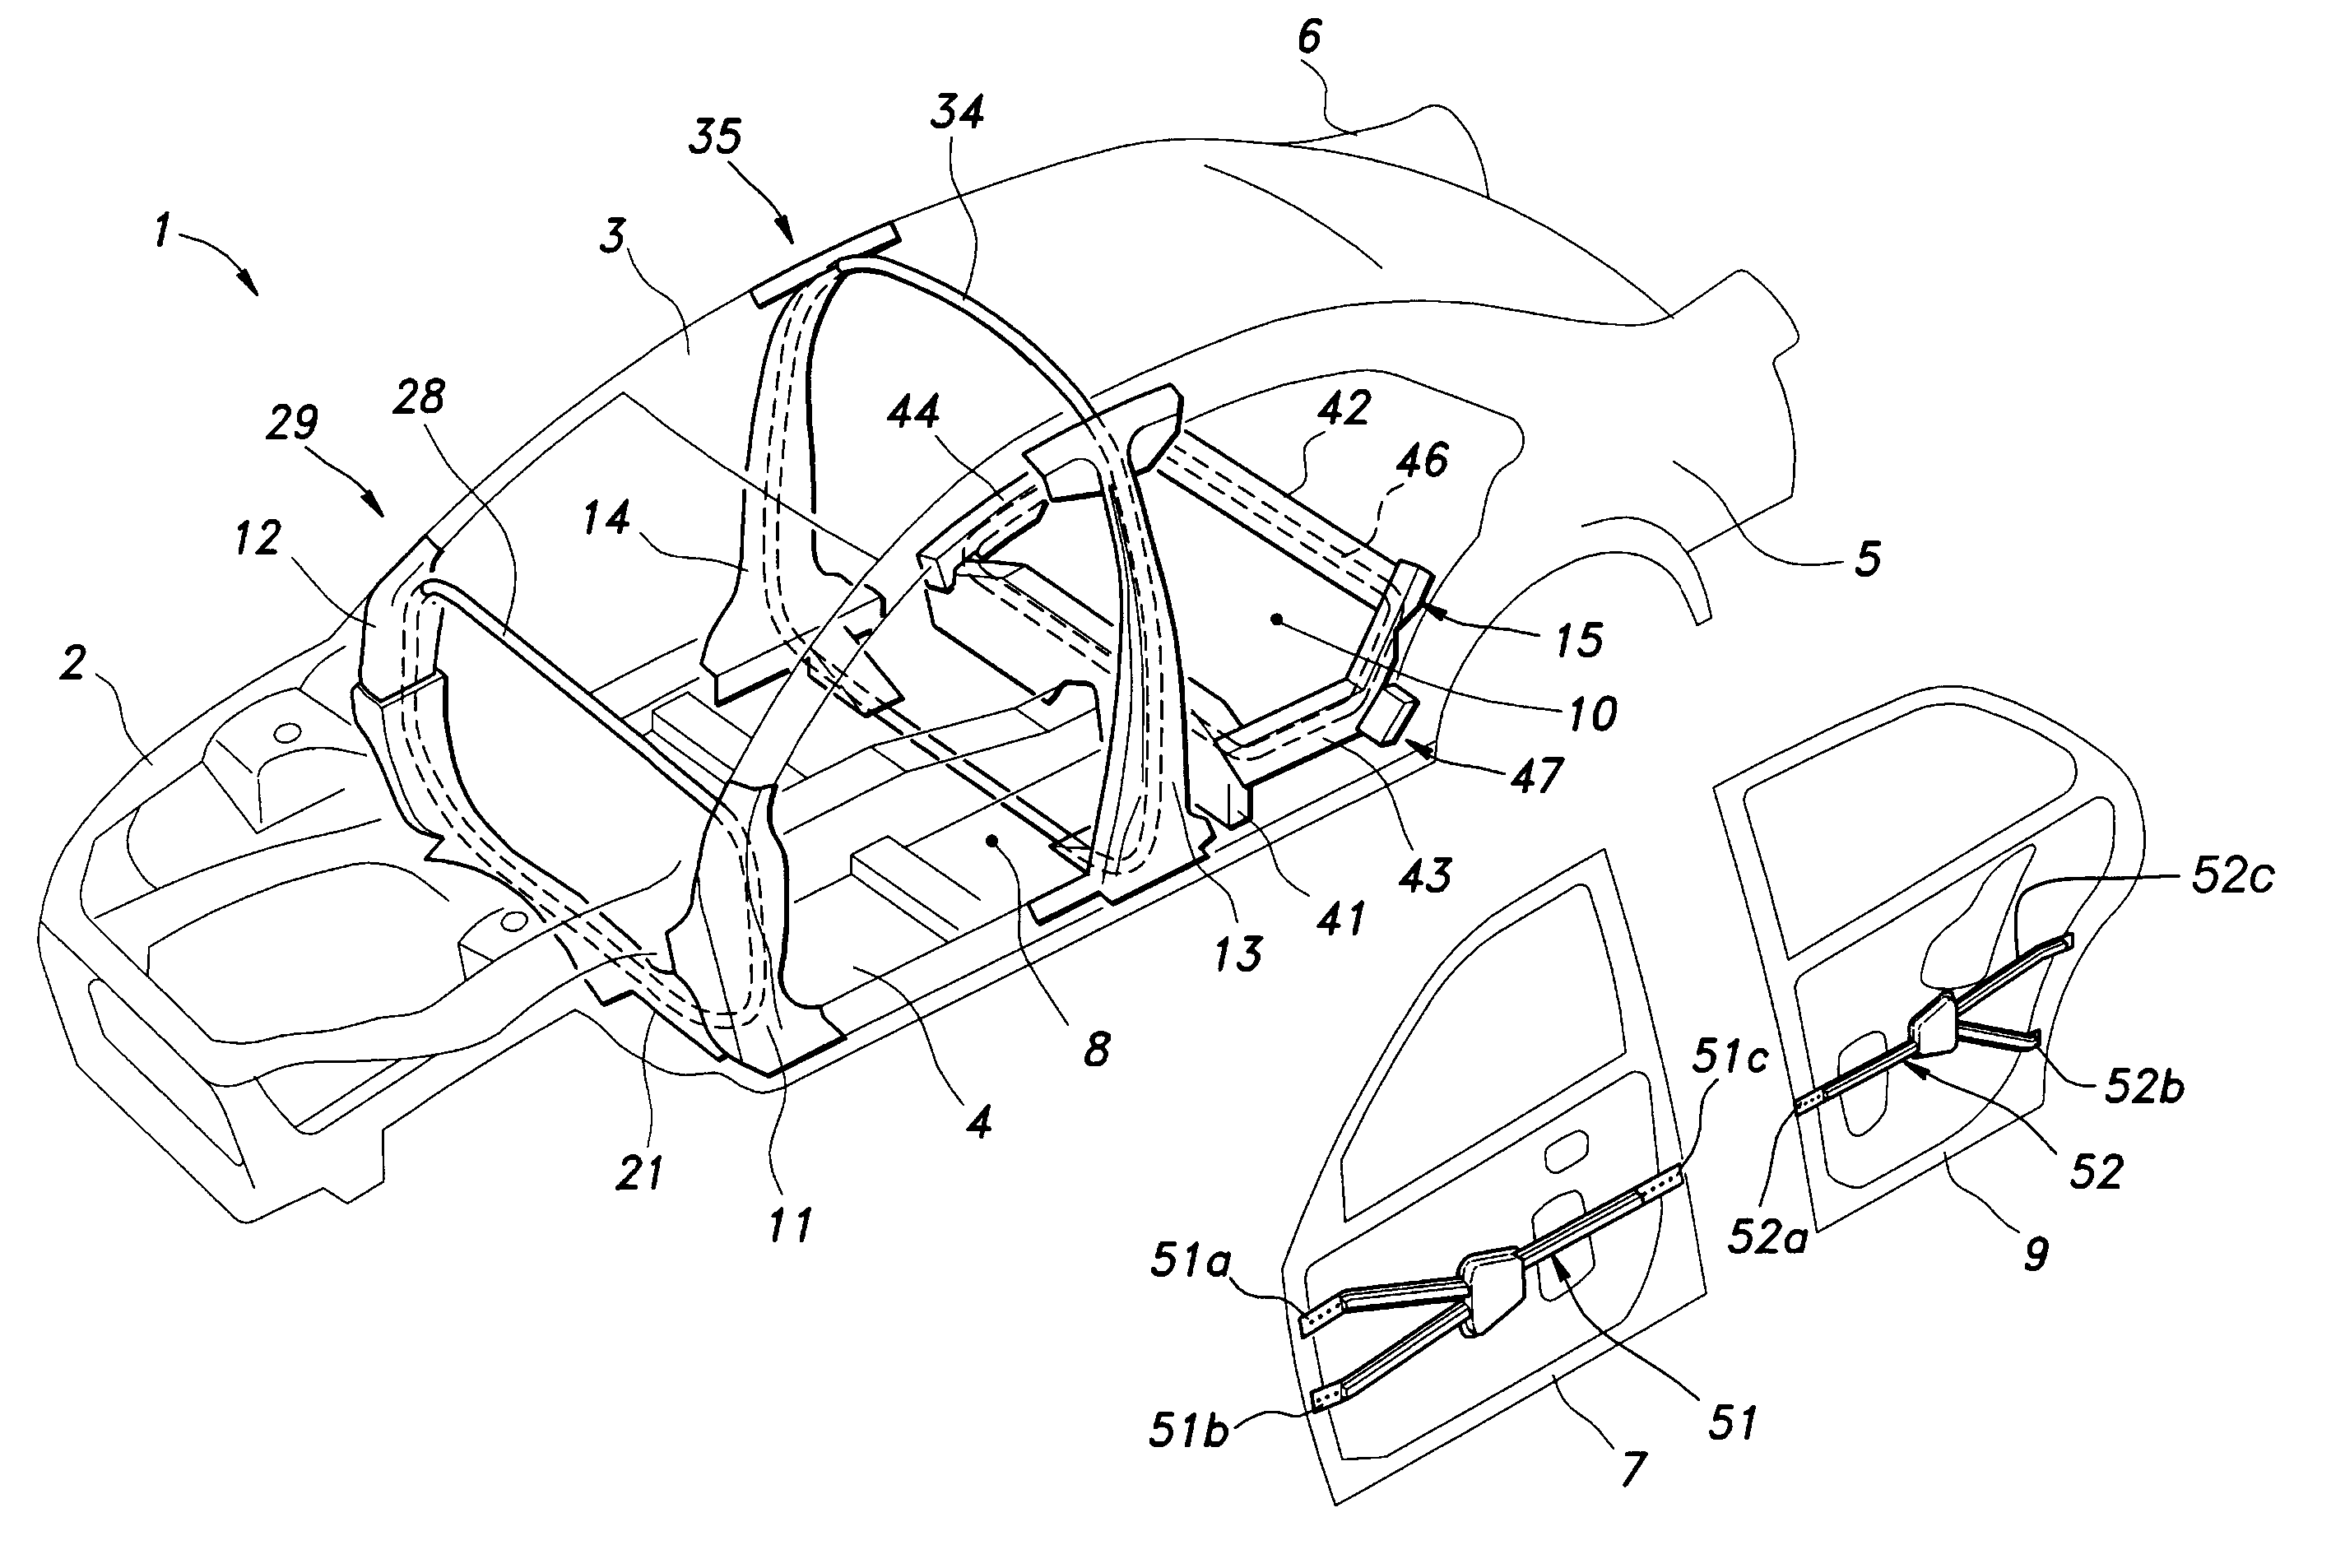 Vehicle body structure reinforced against side impact